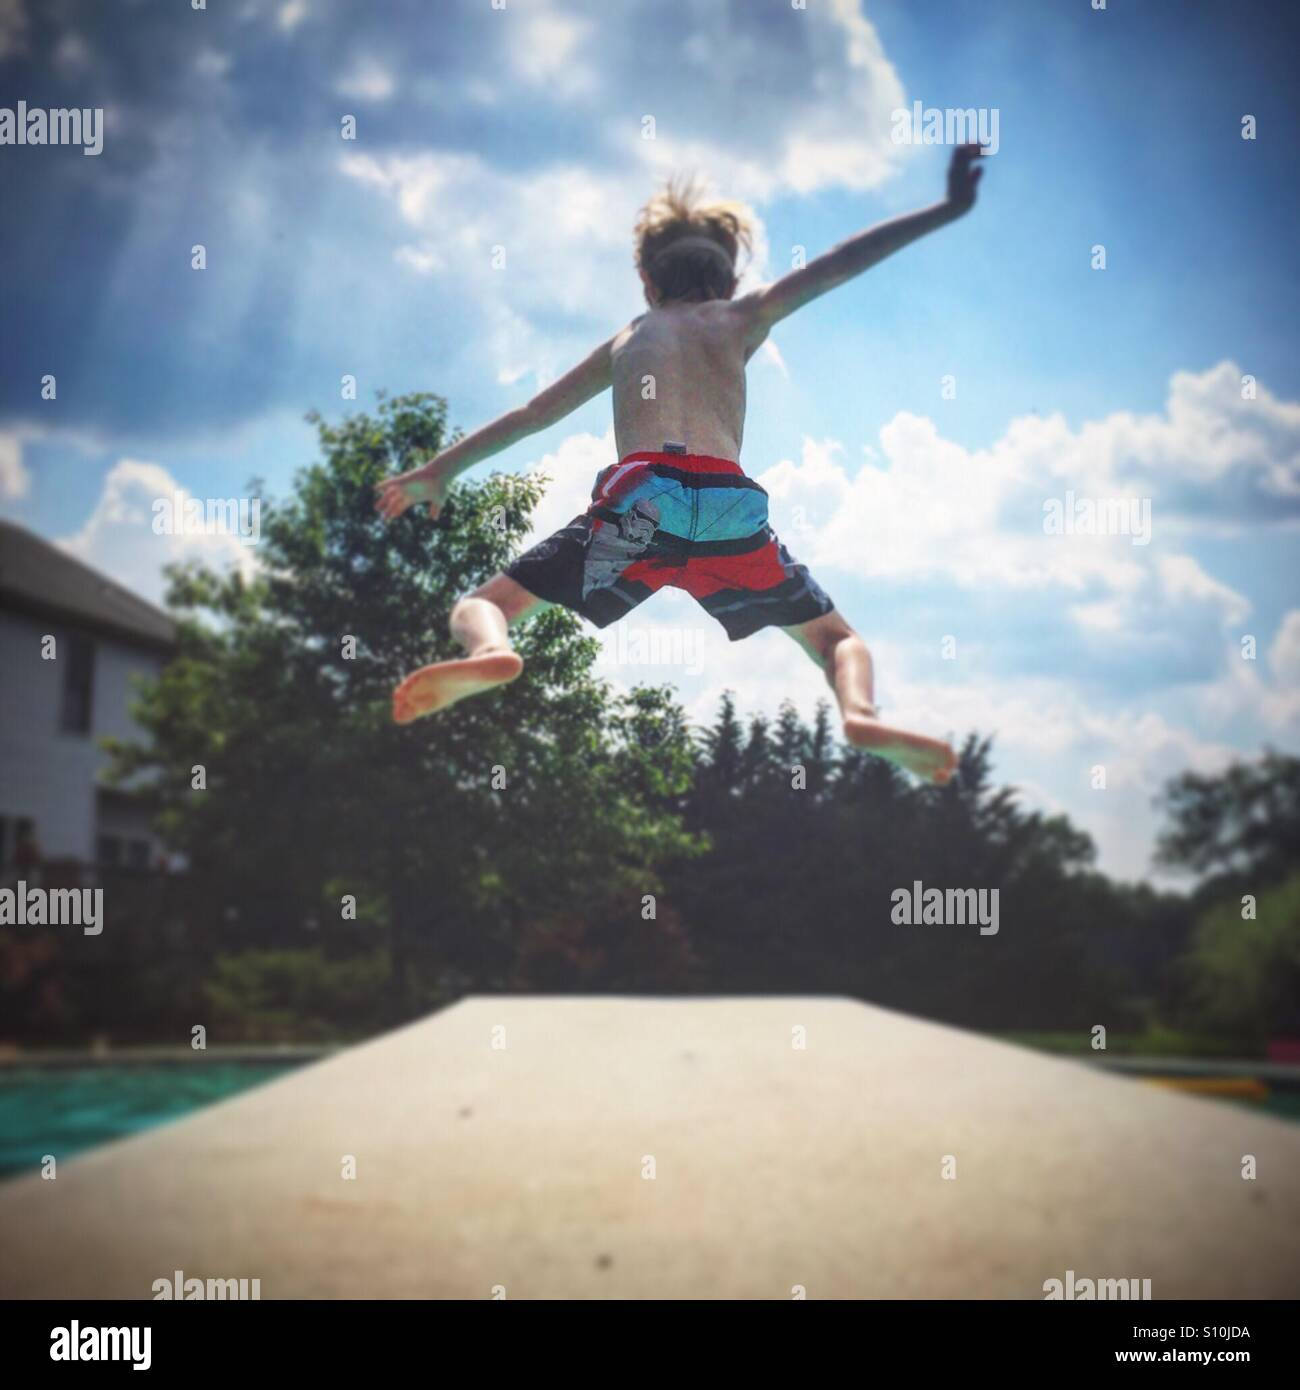 A young boy jumps off a diving board and into a swimming pool on a hot summer day Stock Photo